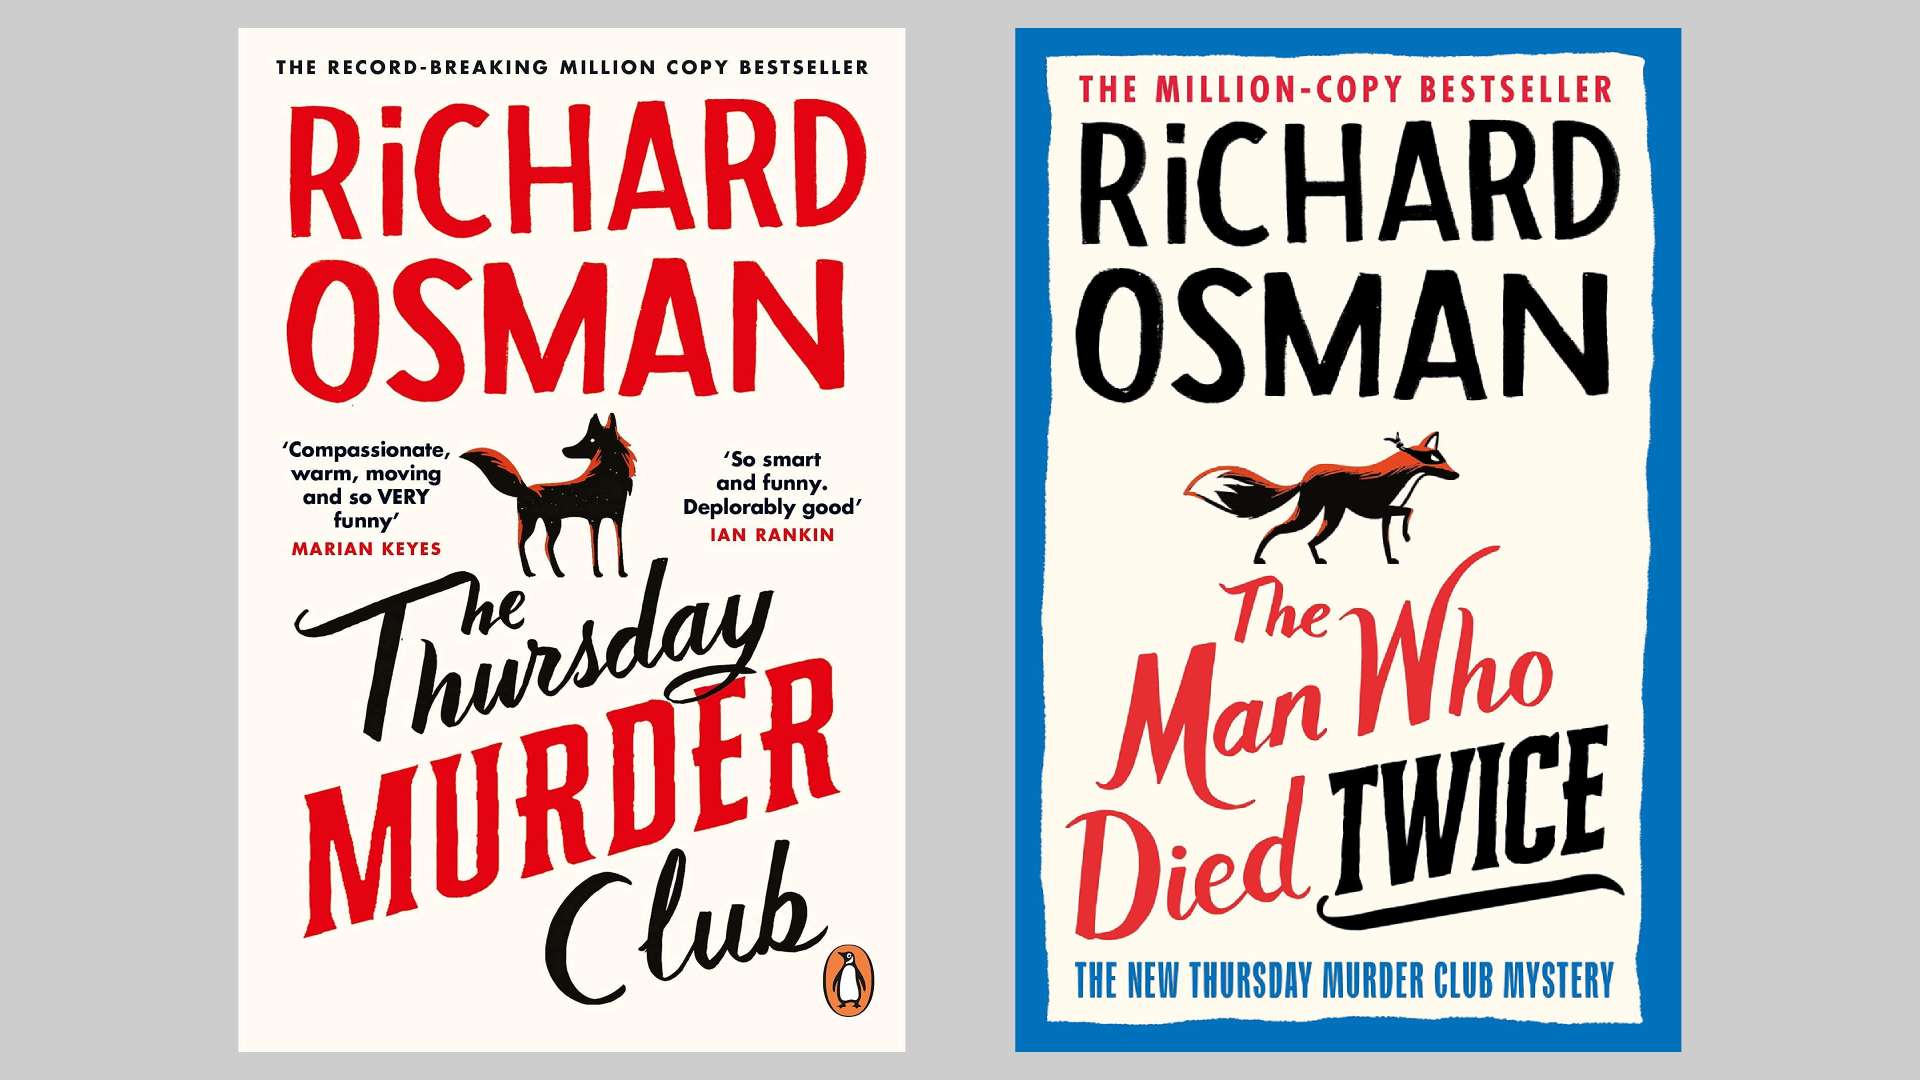 The Thursday Murder Club and The Man Who Died Twice by Richard Osman